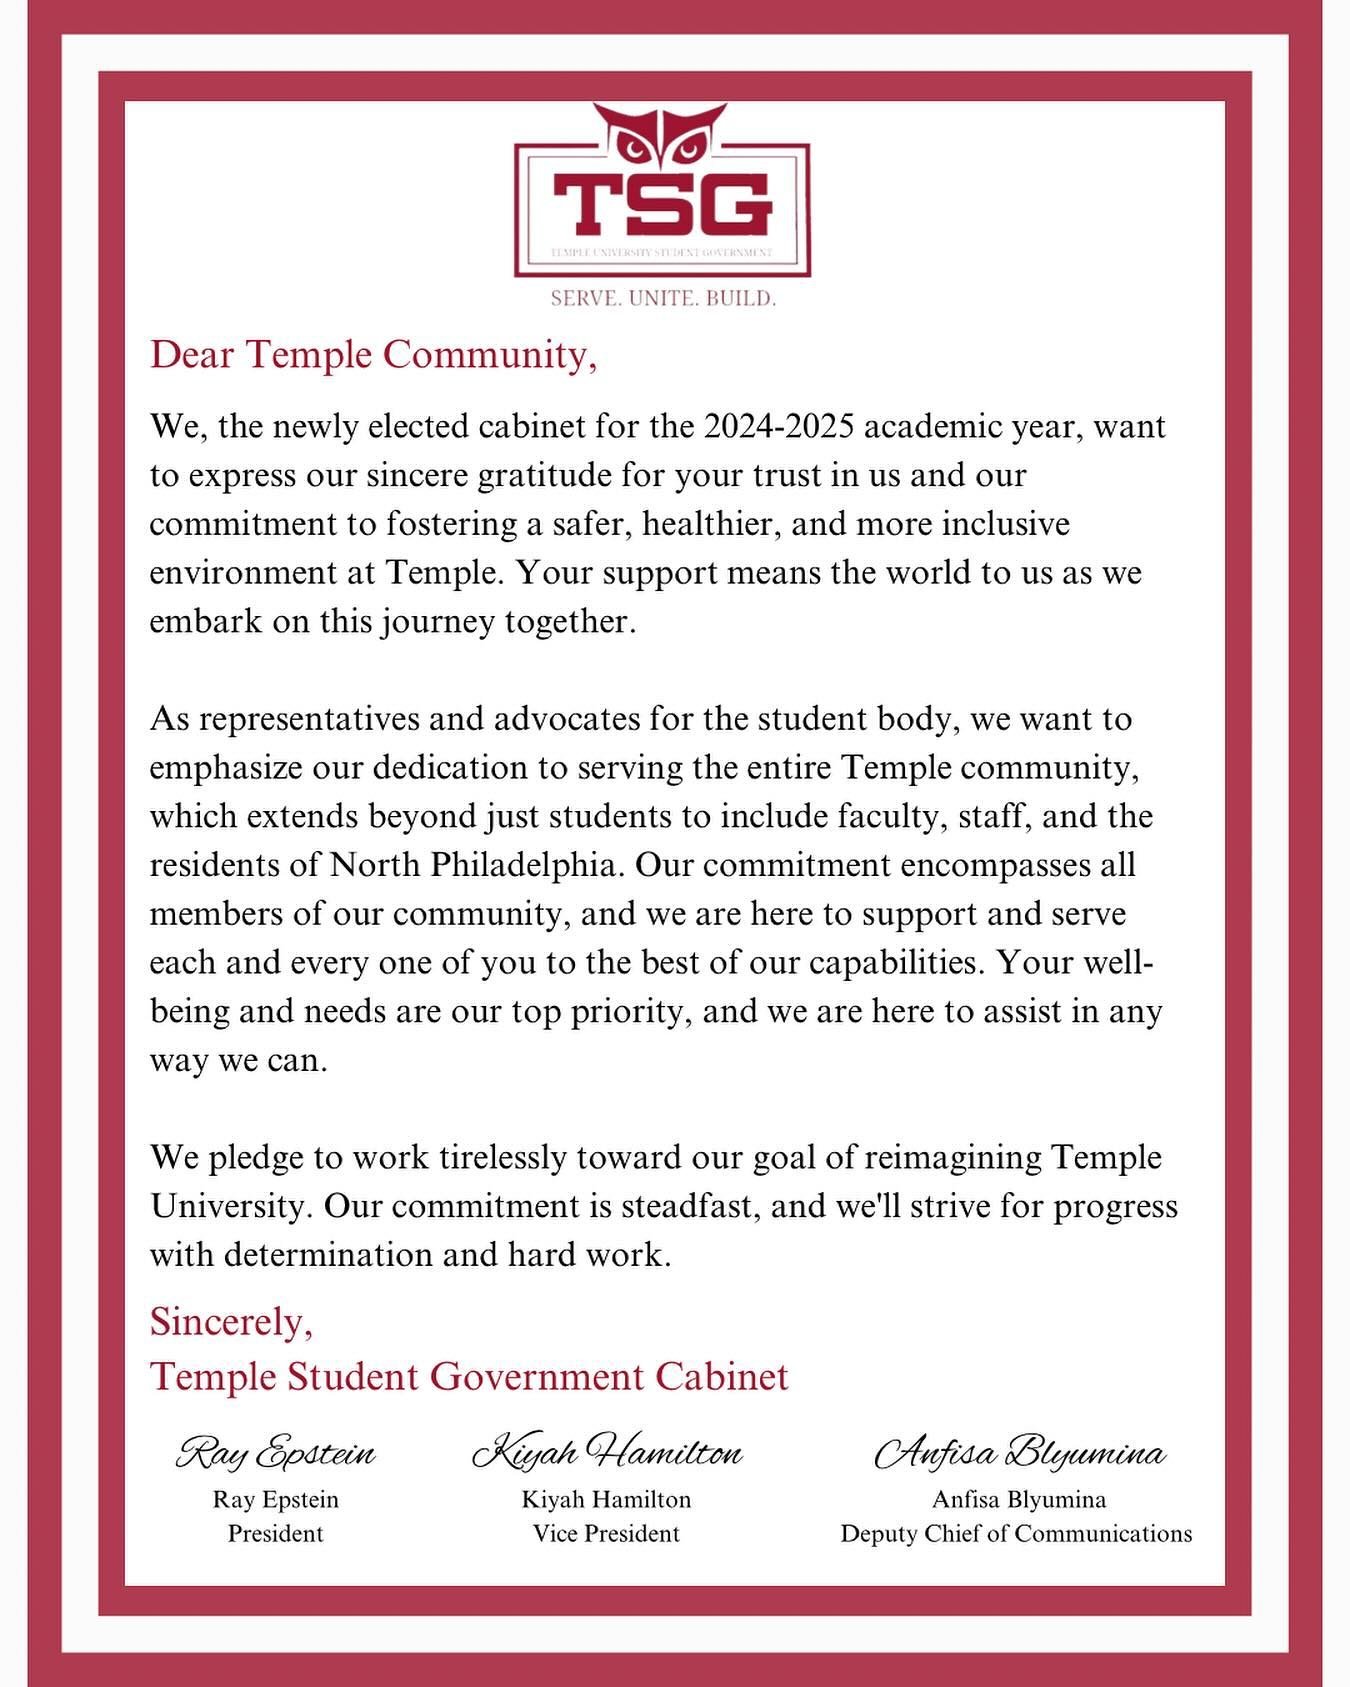 A message to the Temple community from your newly elected cabinet🍒